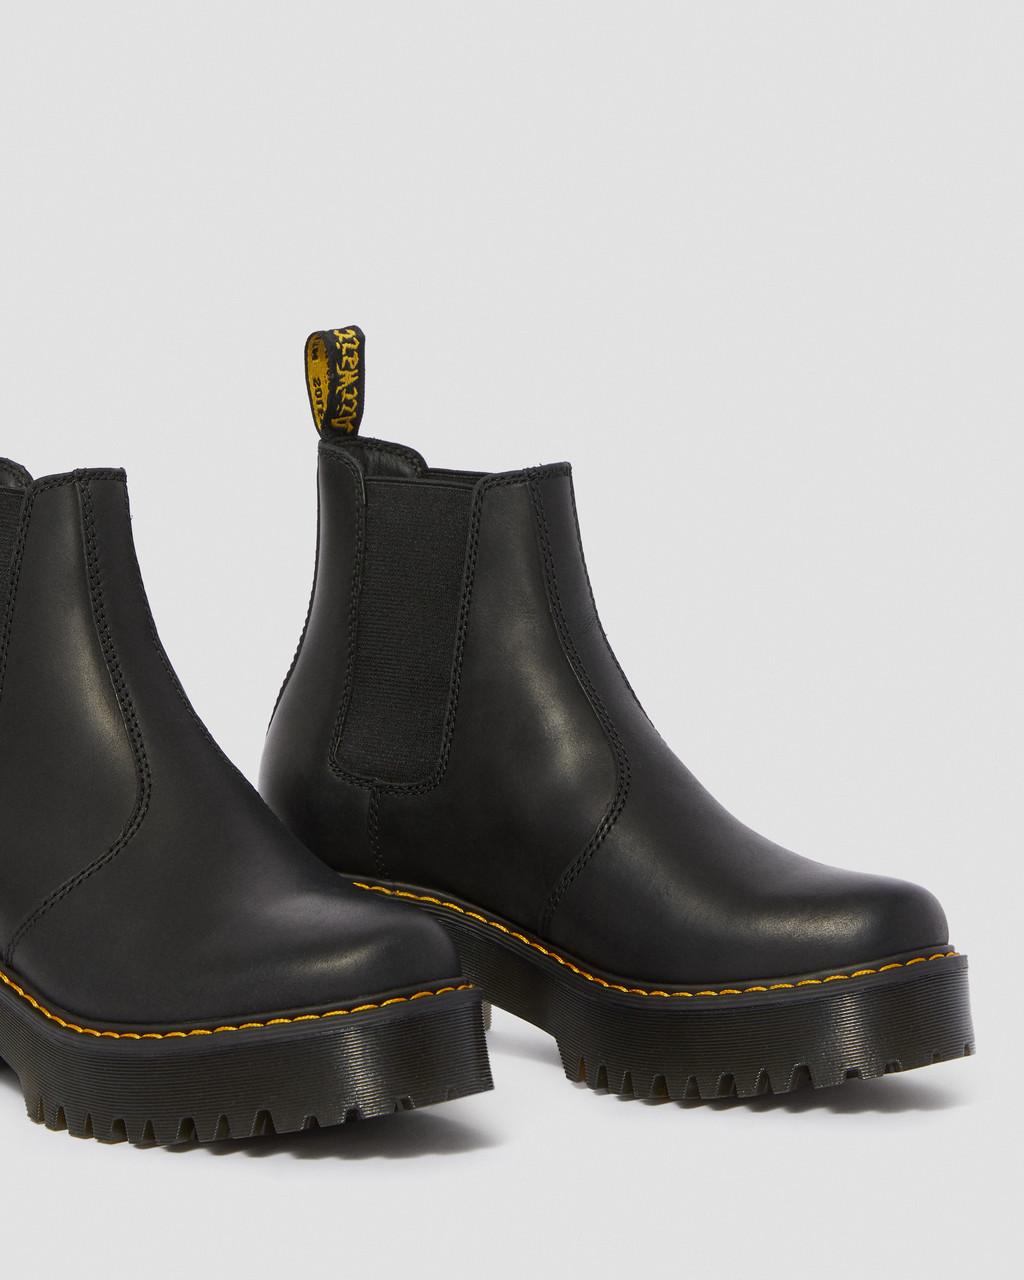 Rometty Wyoming Leather Platform Chelsea Boots in Black | Dr. Martens